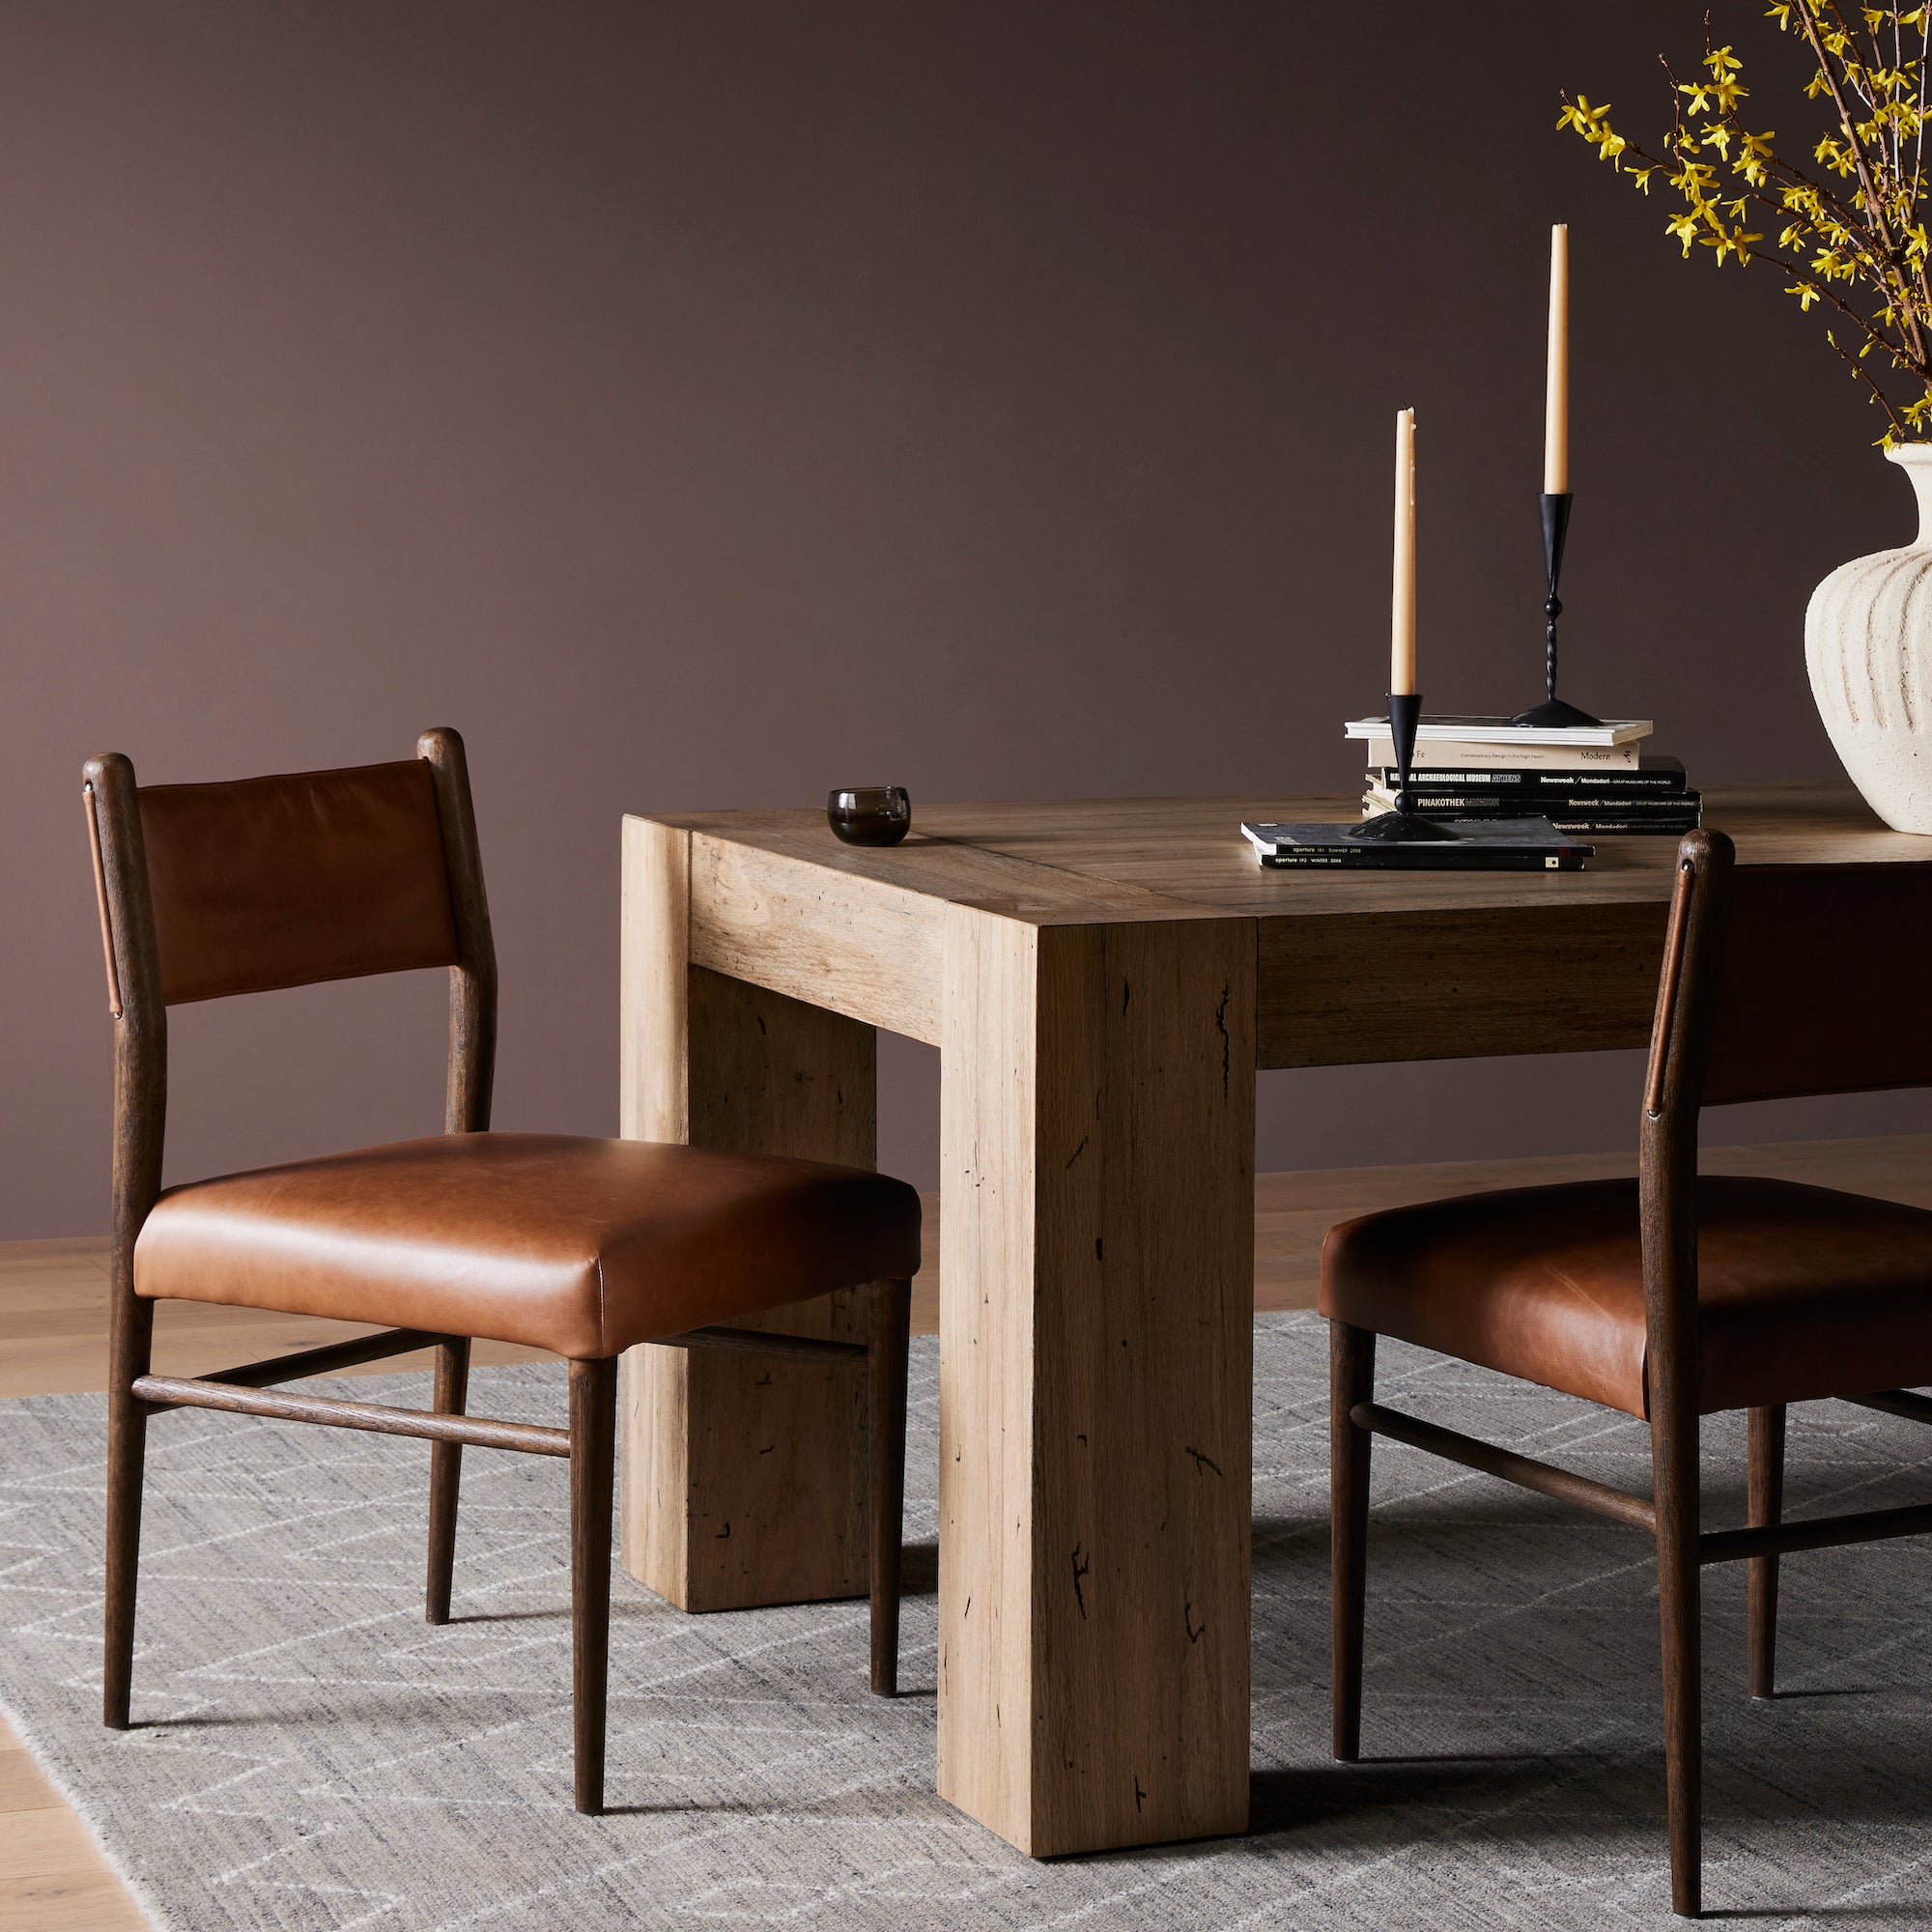 Morena Dining Chair